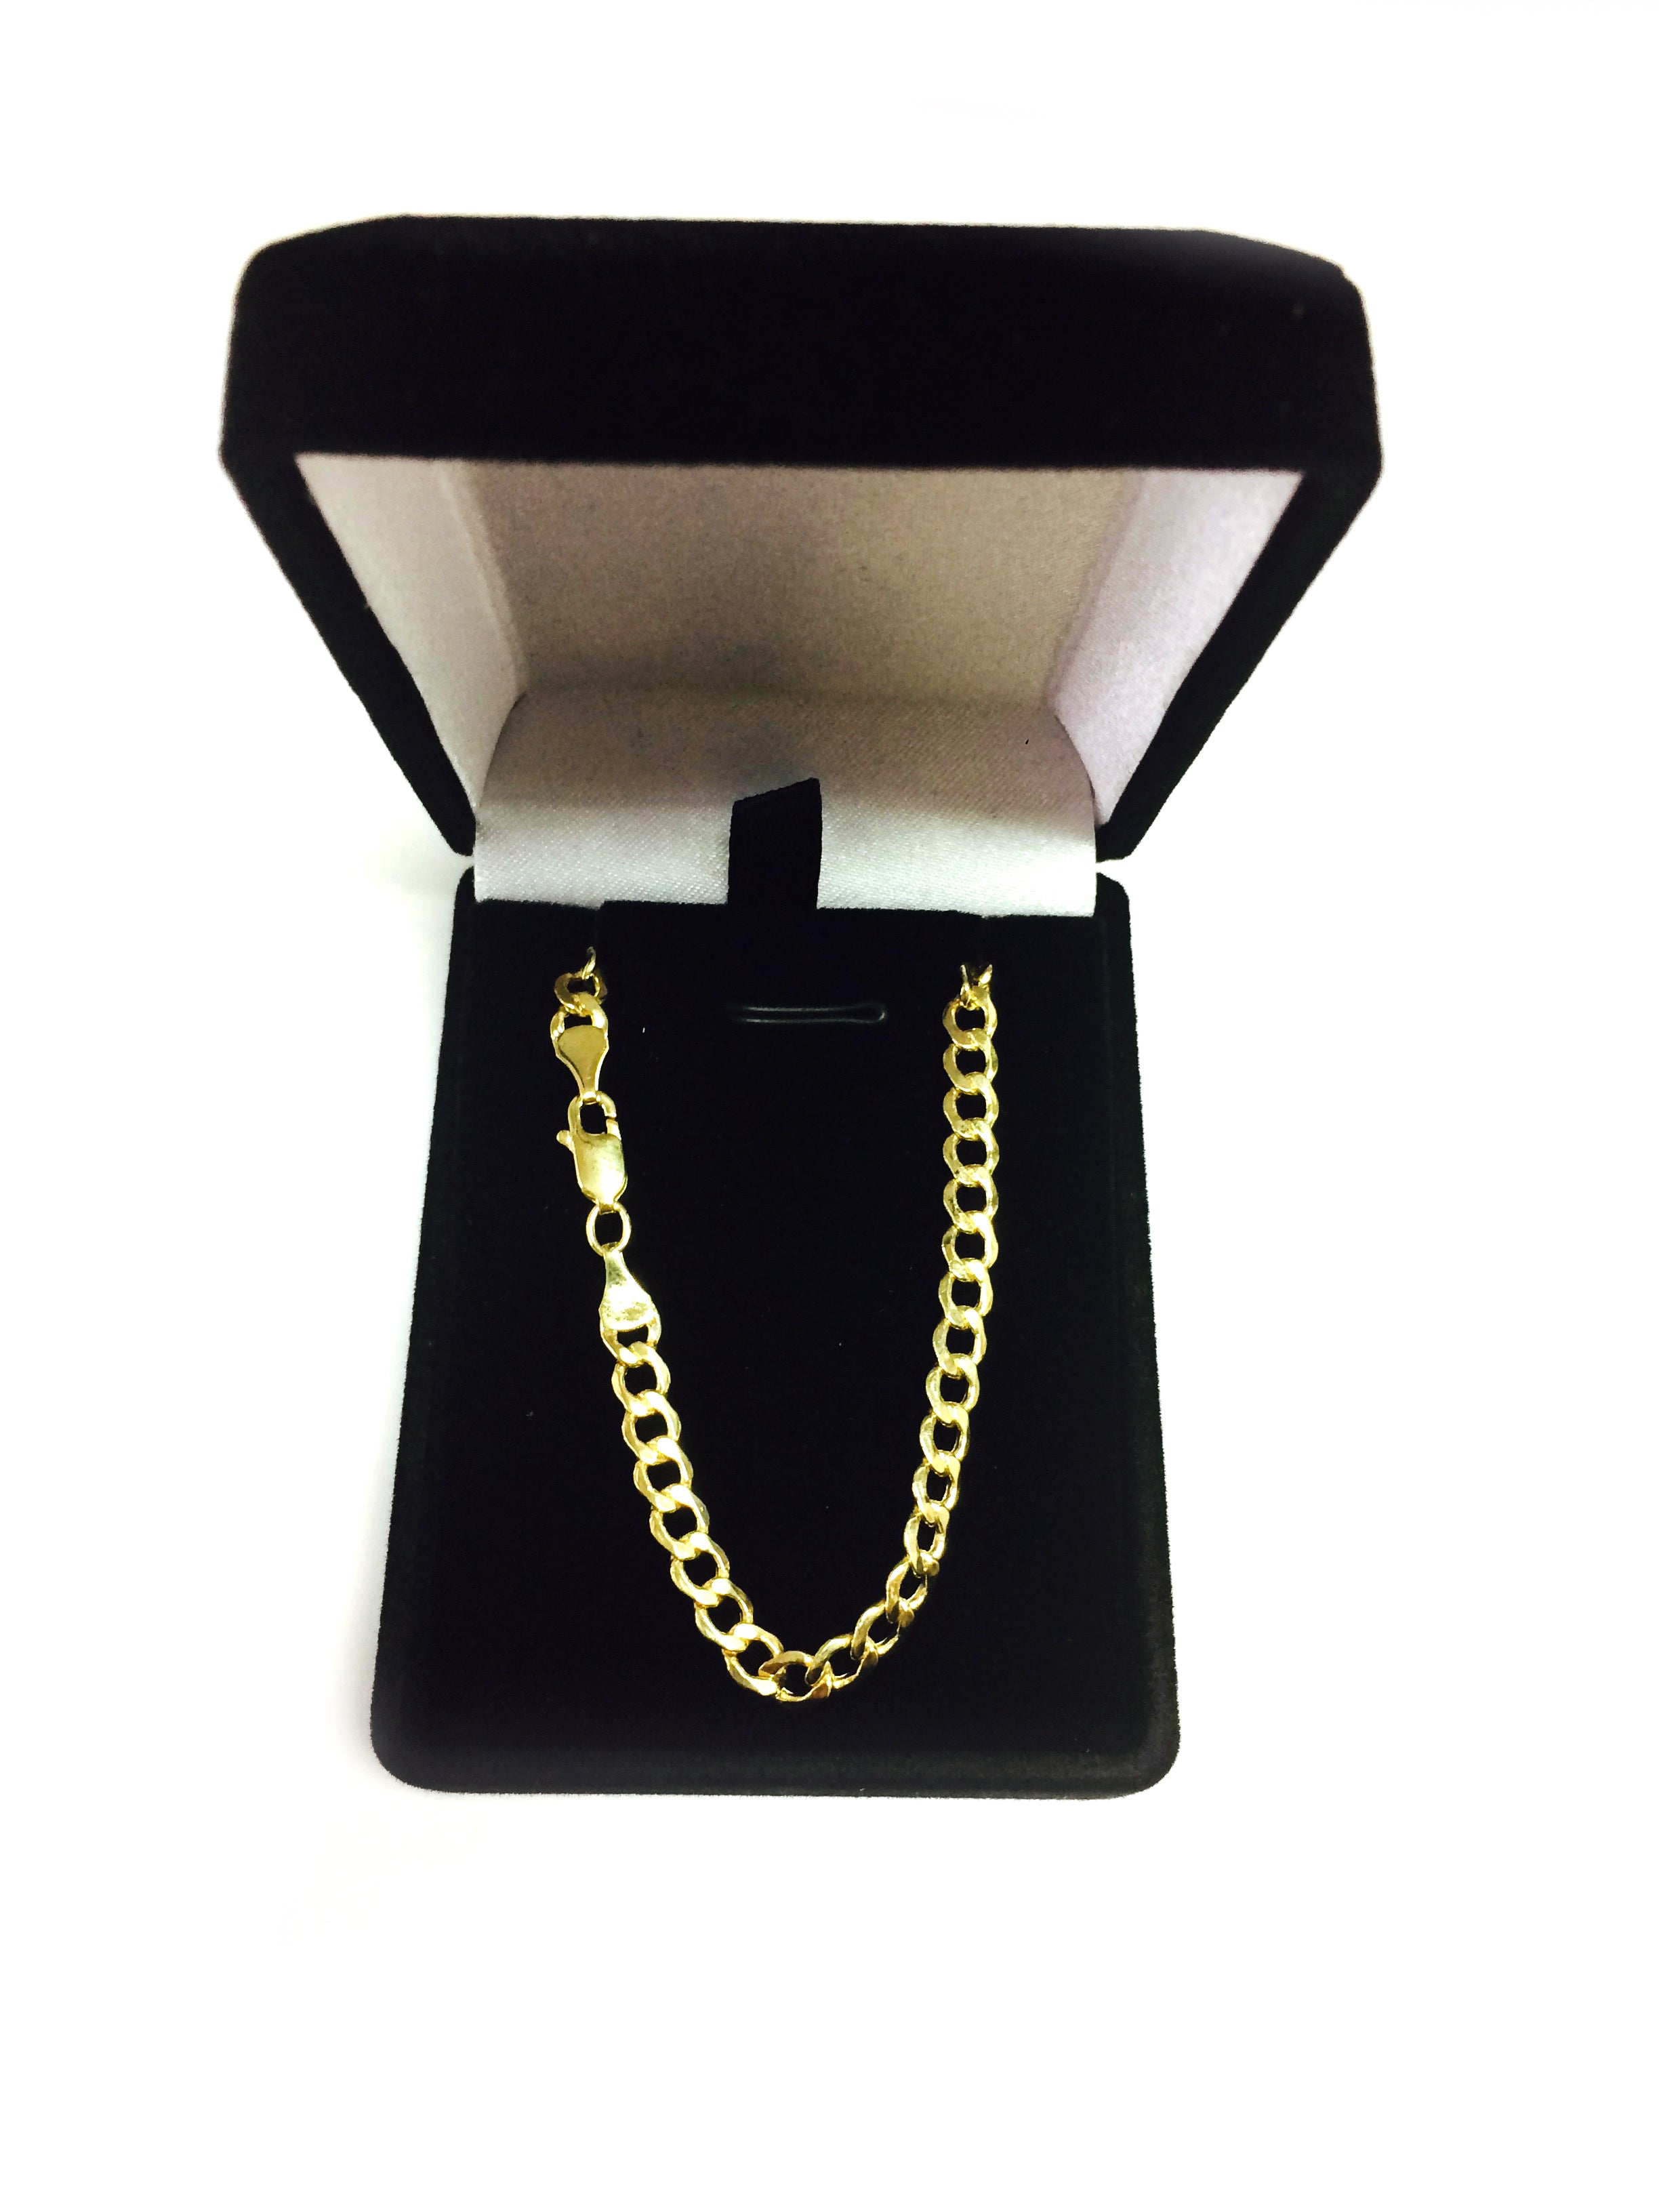 10k Yellow Gold Curb Hollow Chain Necklace, 4.4mm